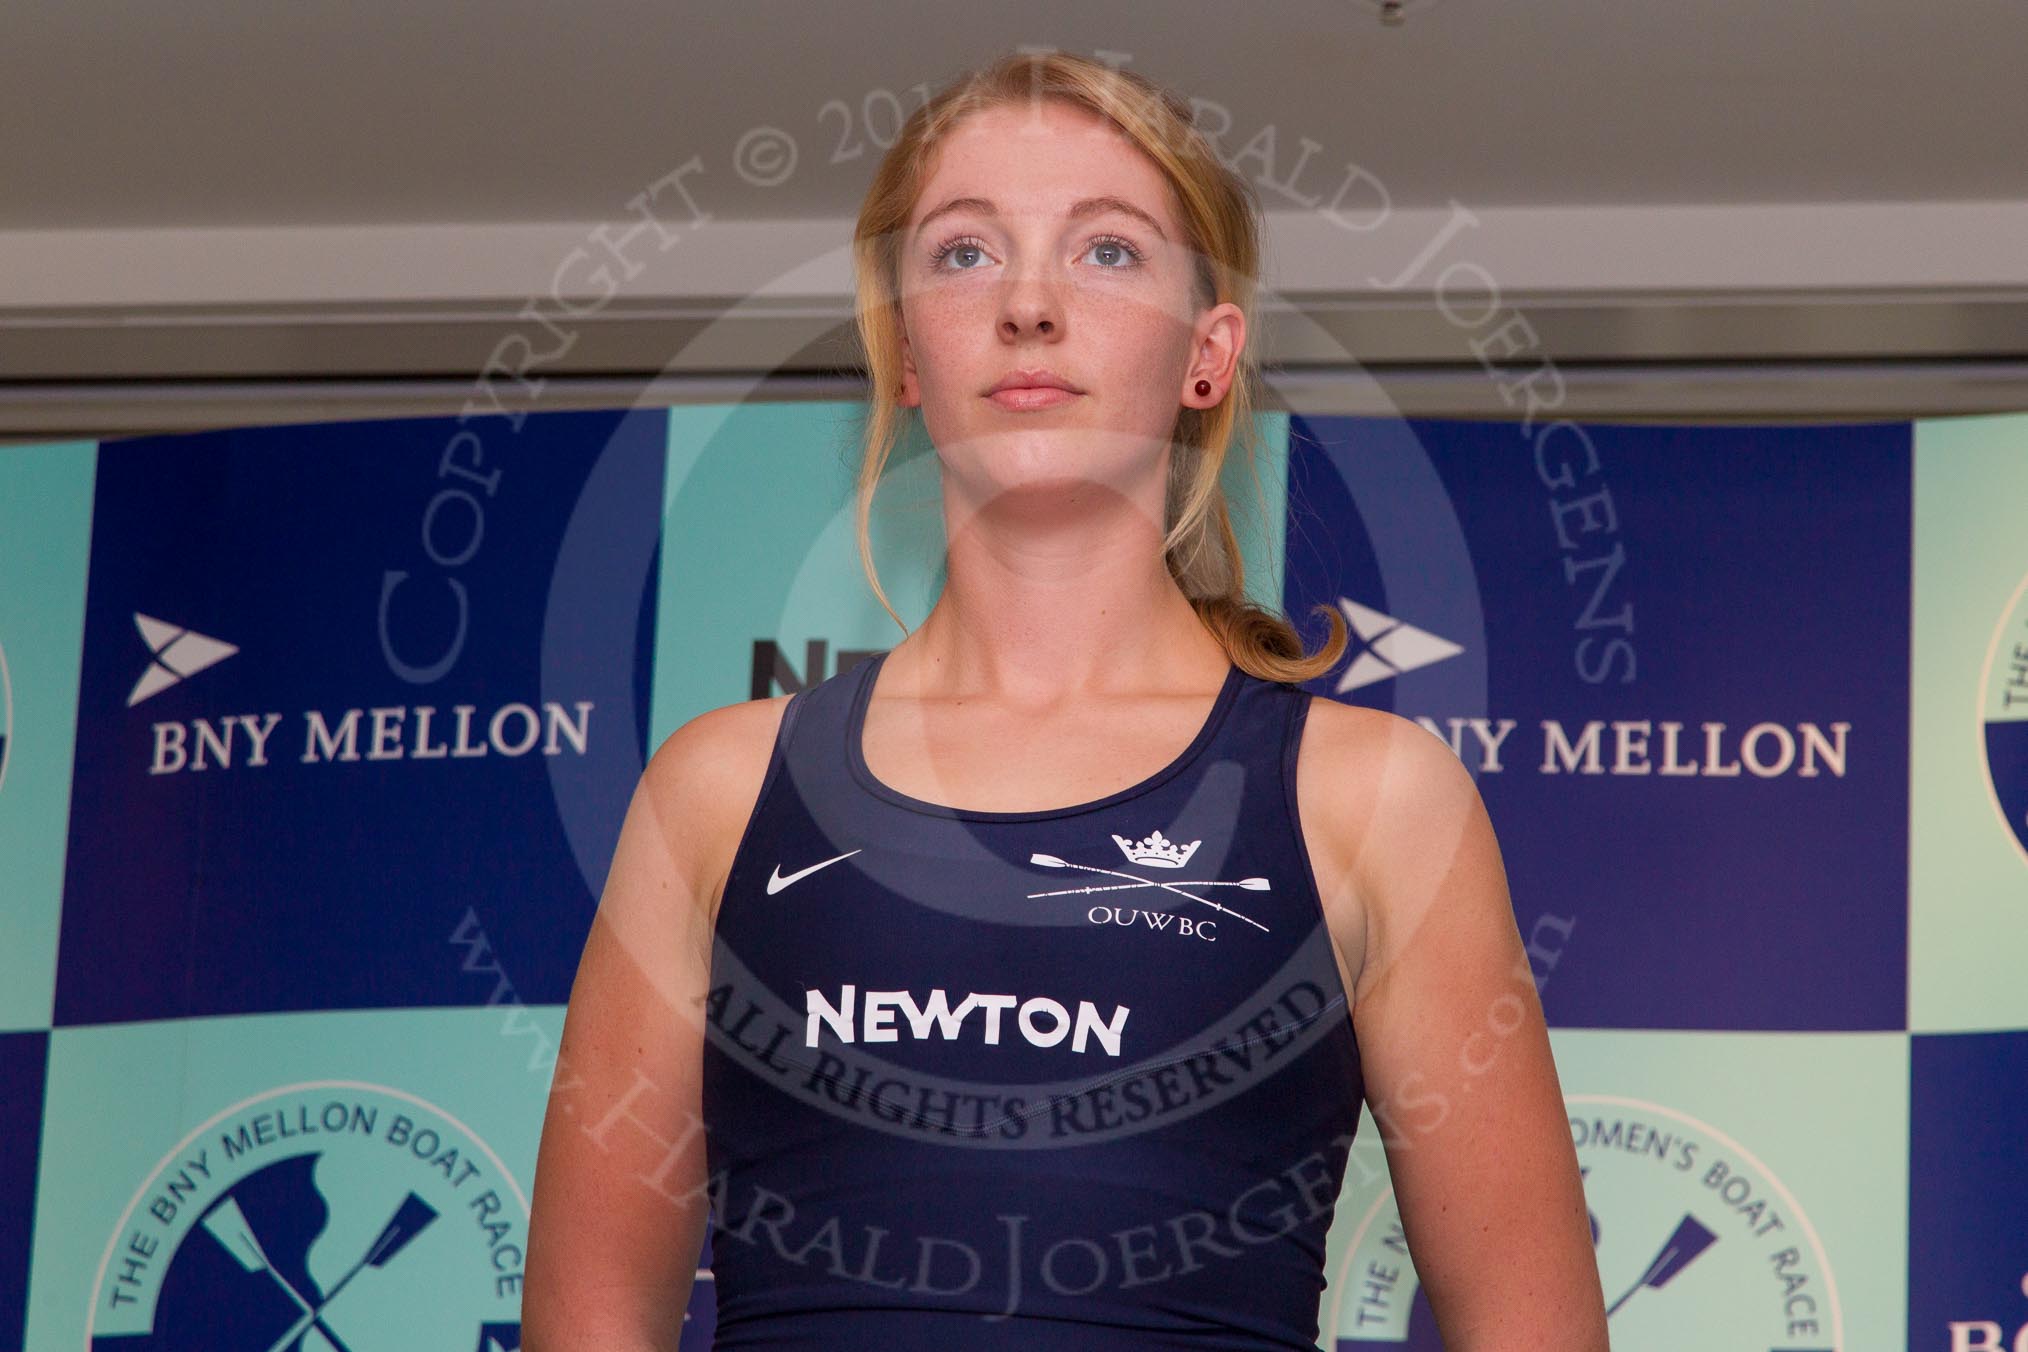 The Boat Race season 2014 - Crew Announcement and Weigh In: The 2014 Women's Boat Race crews: Oxford 7 seat Amber De Vere - 72kg..
BNY Mellon Centre,
London EC4V 4LA,
London,
United Kingdom,
on 10 March 2014 at 11:49, image #45